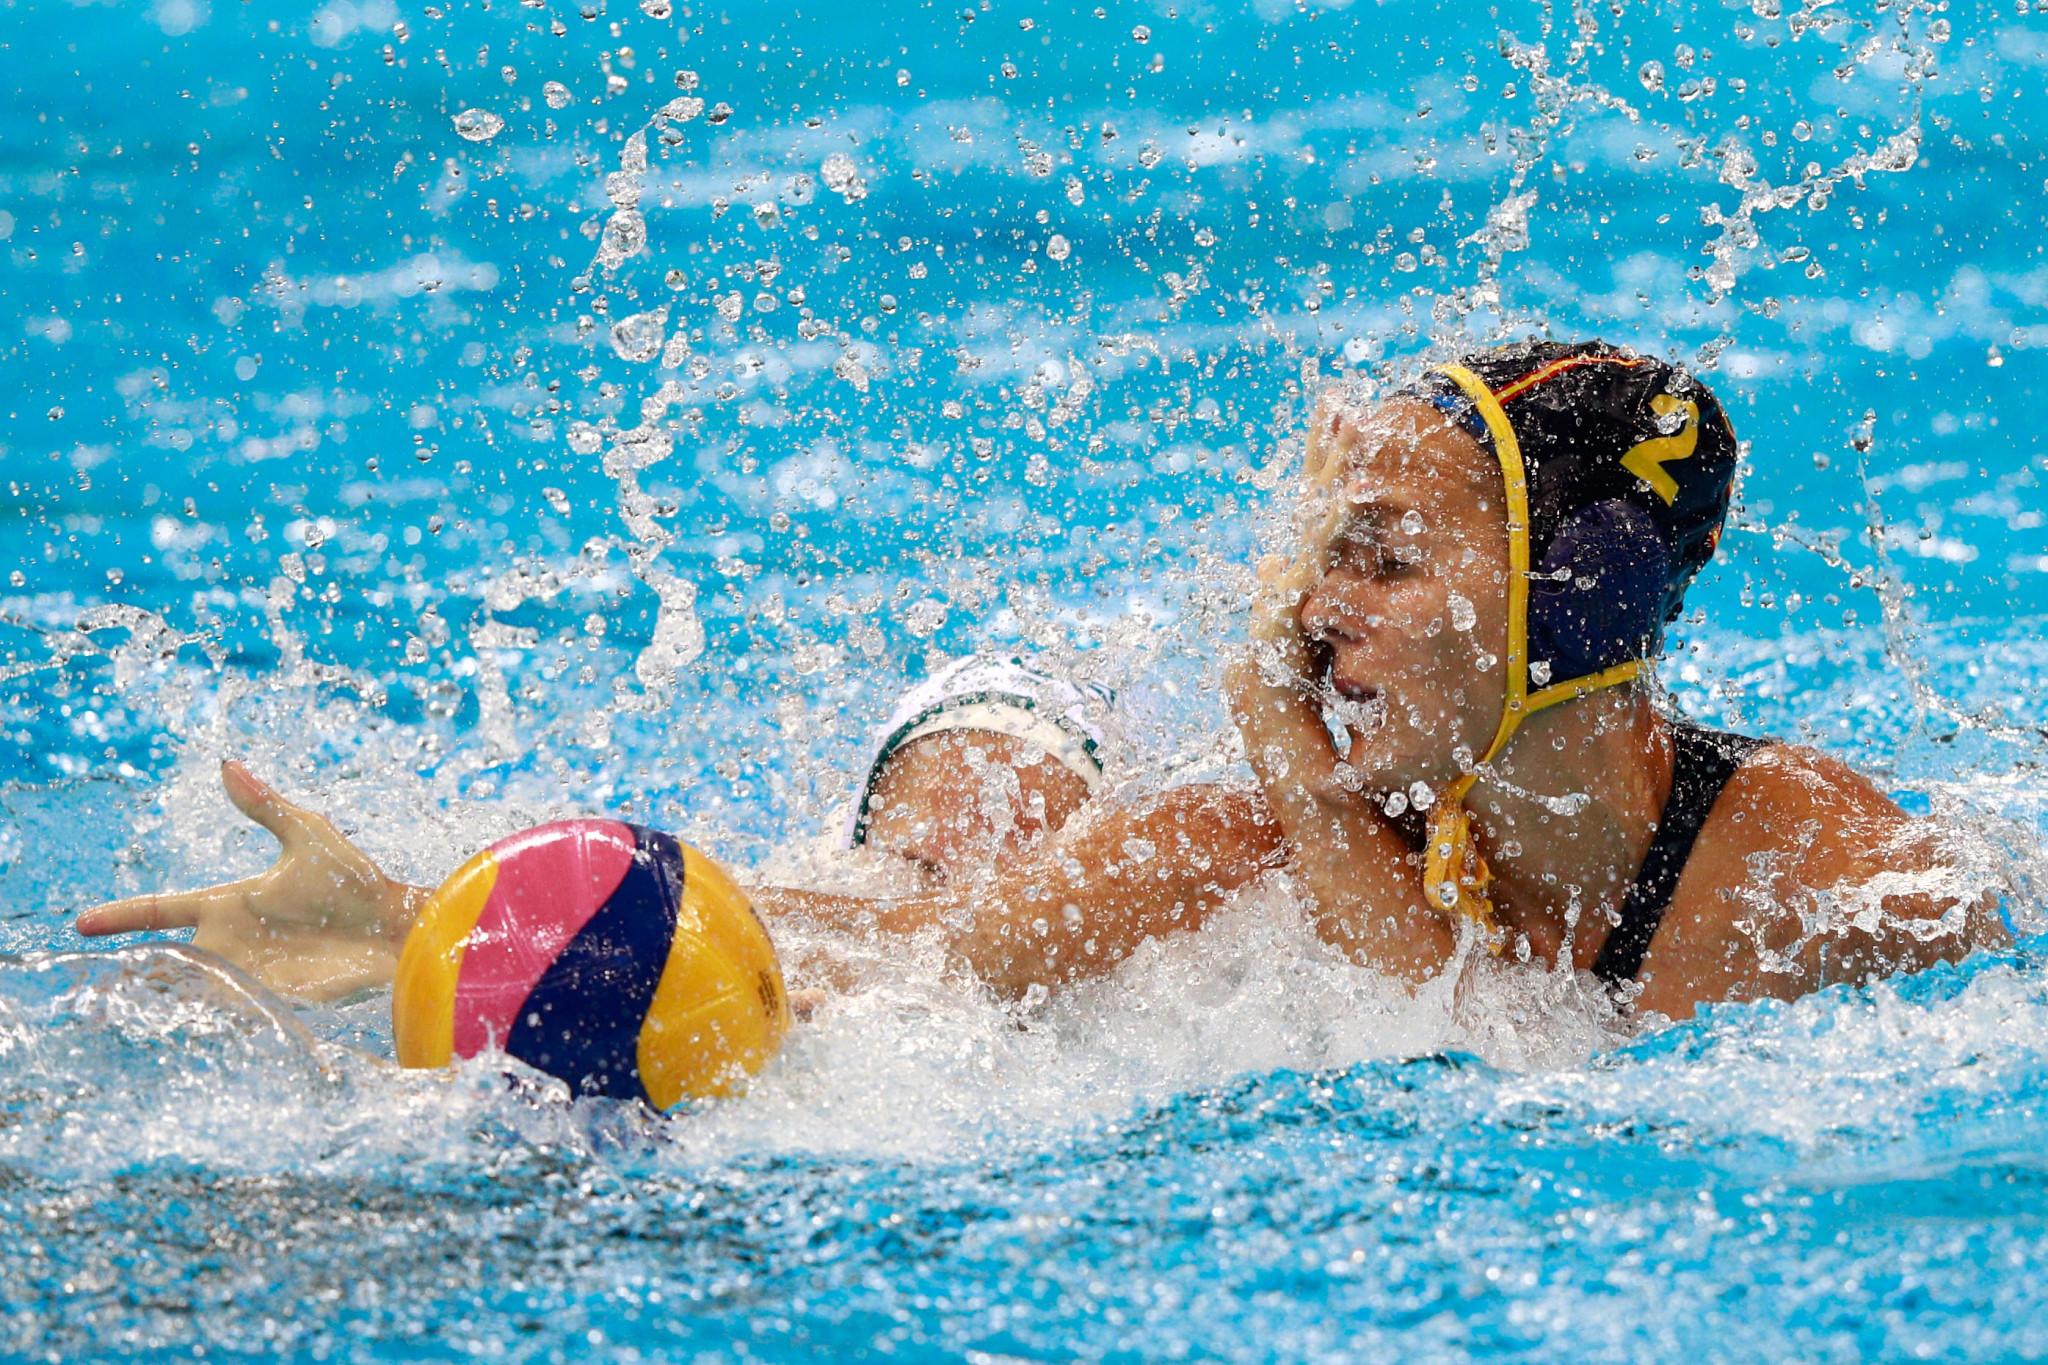 FINA postpones Olympic water polo qualifier in Italy